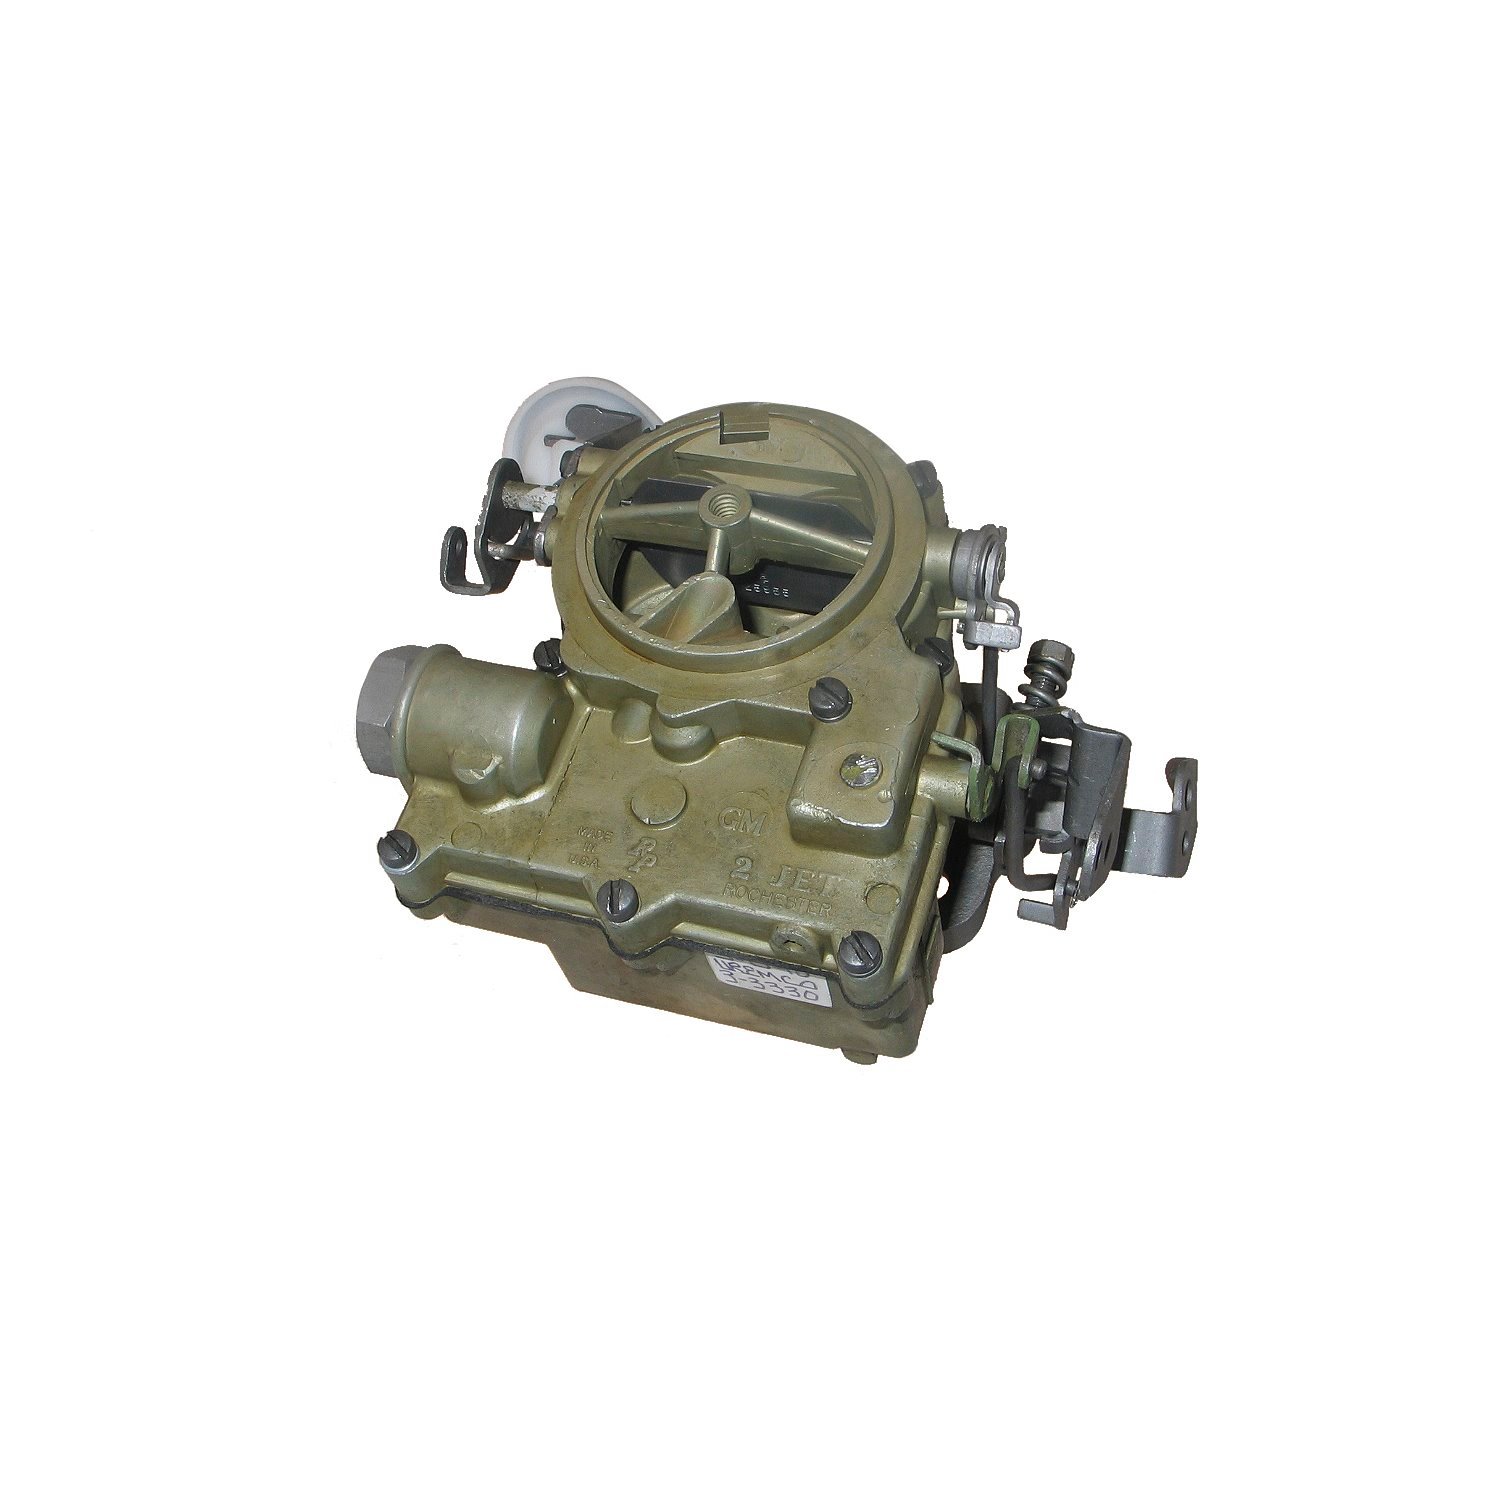 3-3330 Rochester Remanufactured Carburetor, 2GV-Style